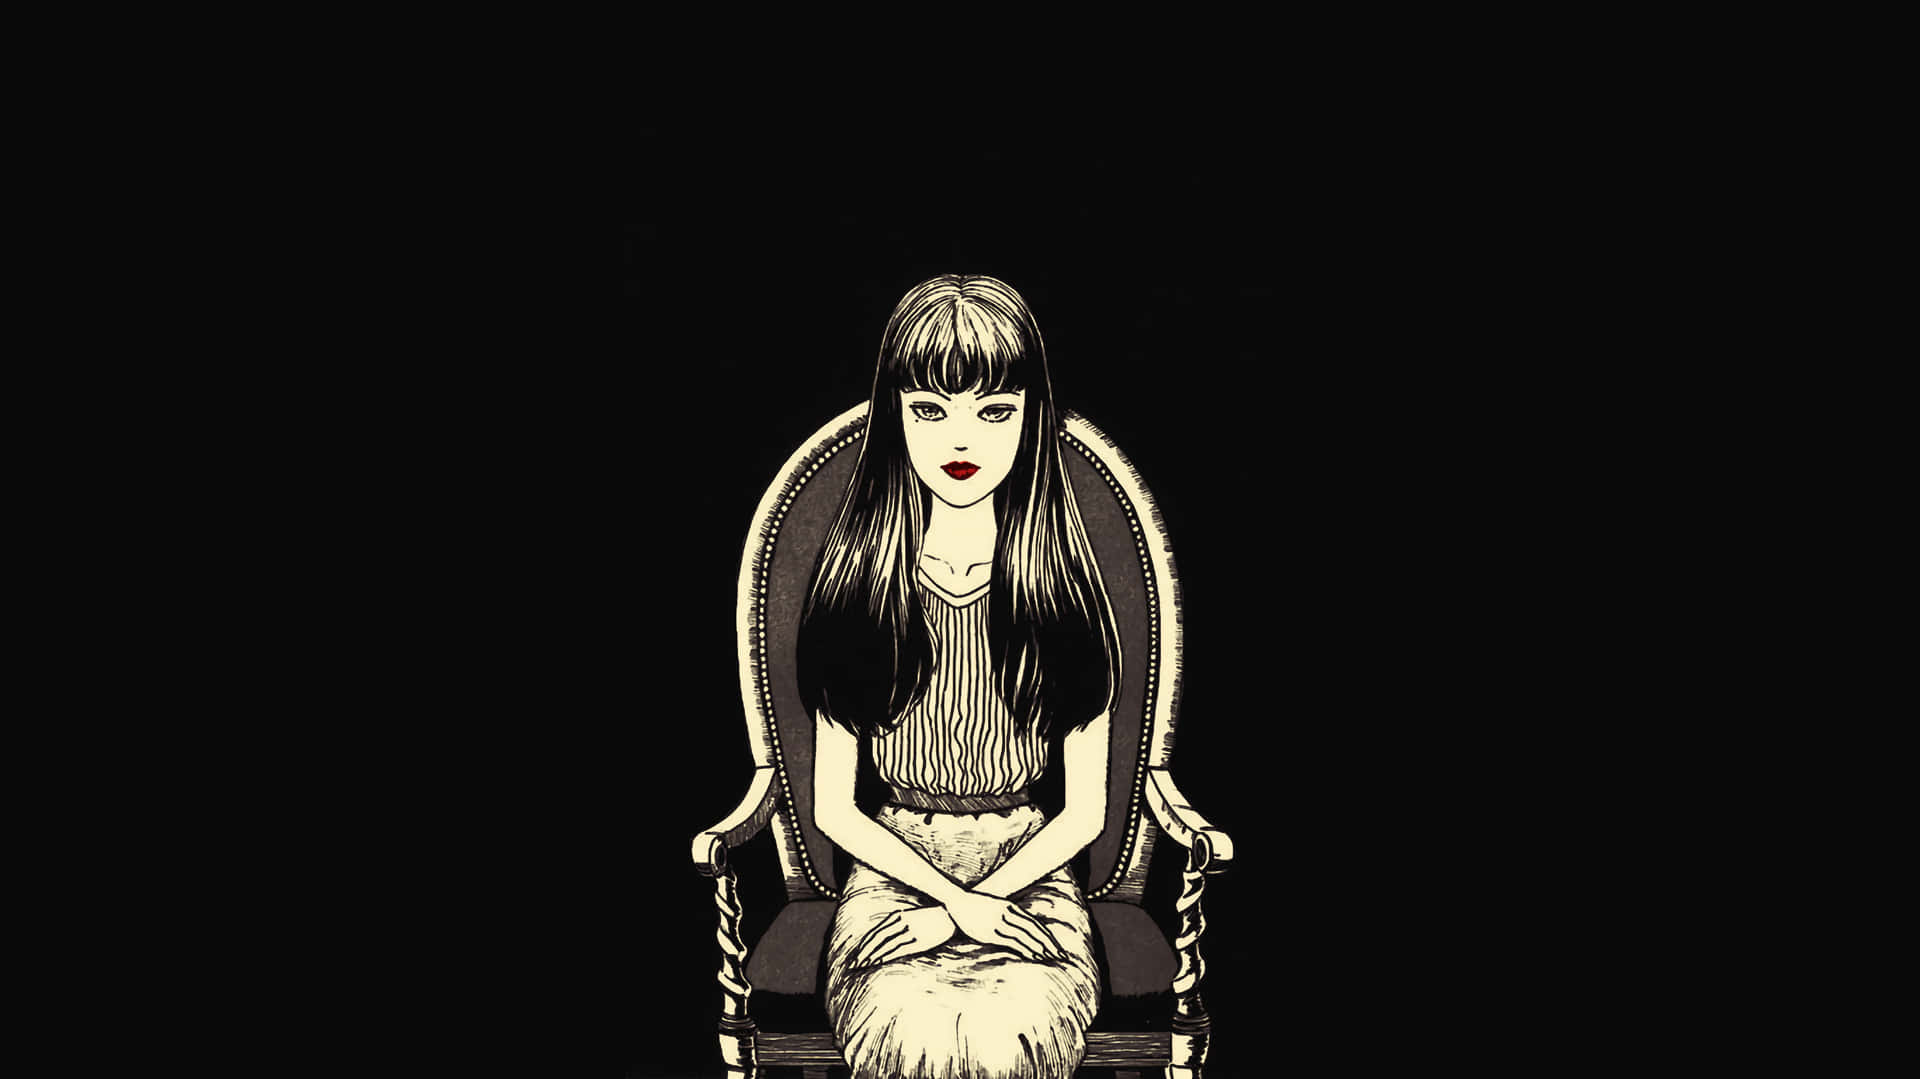 Tomie On Chair Wallpaper